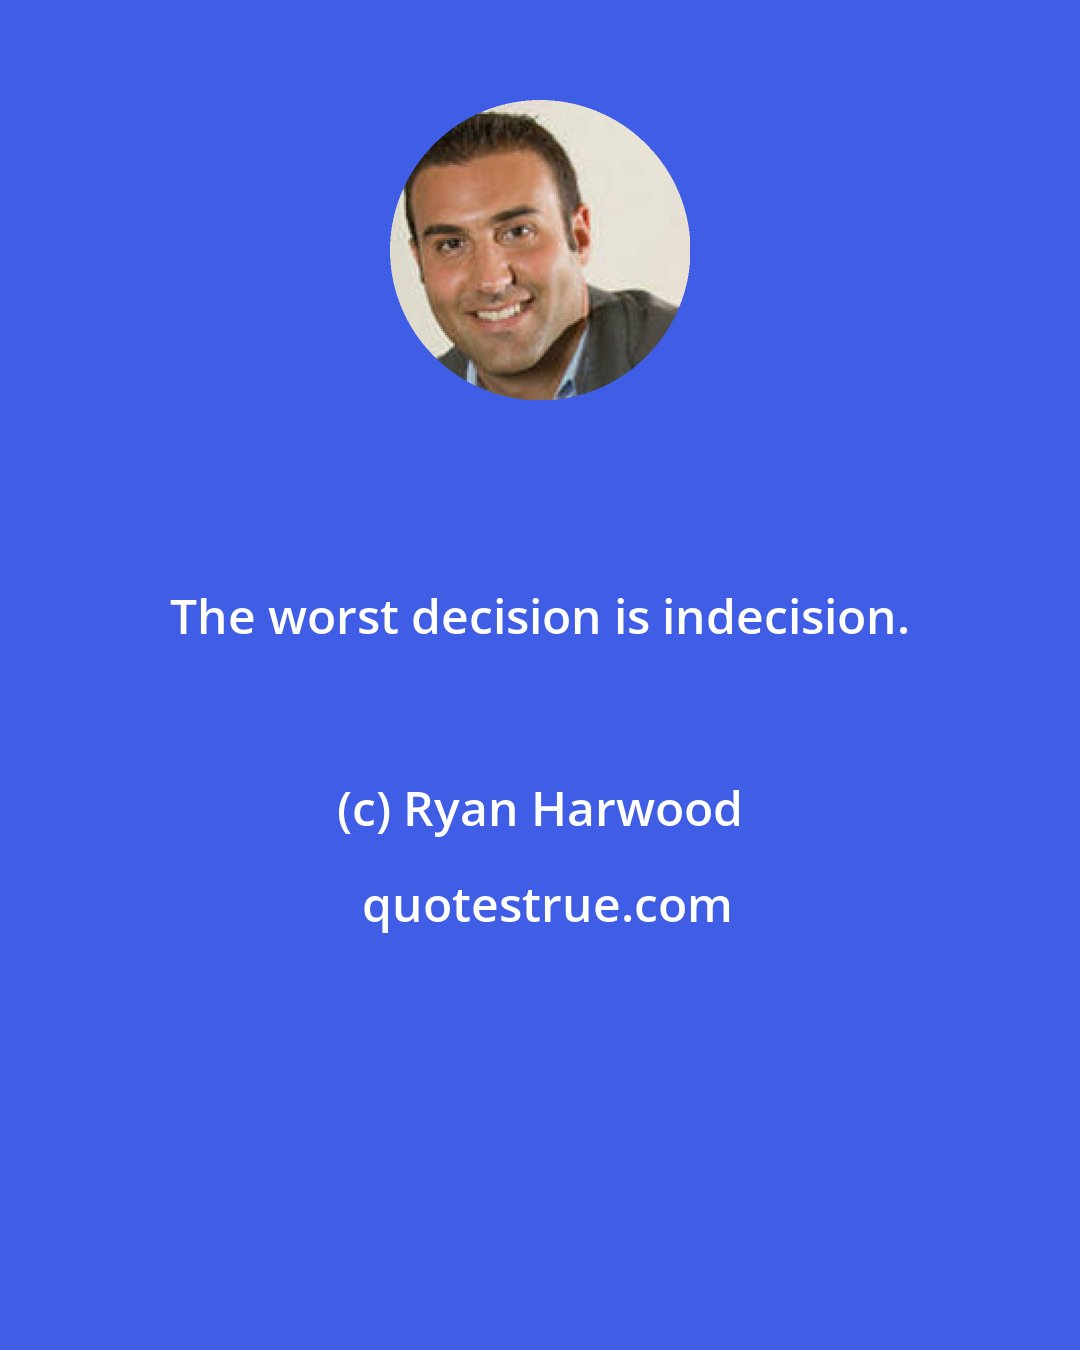 Ryan Harwood: The worst decision is indecision.